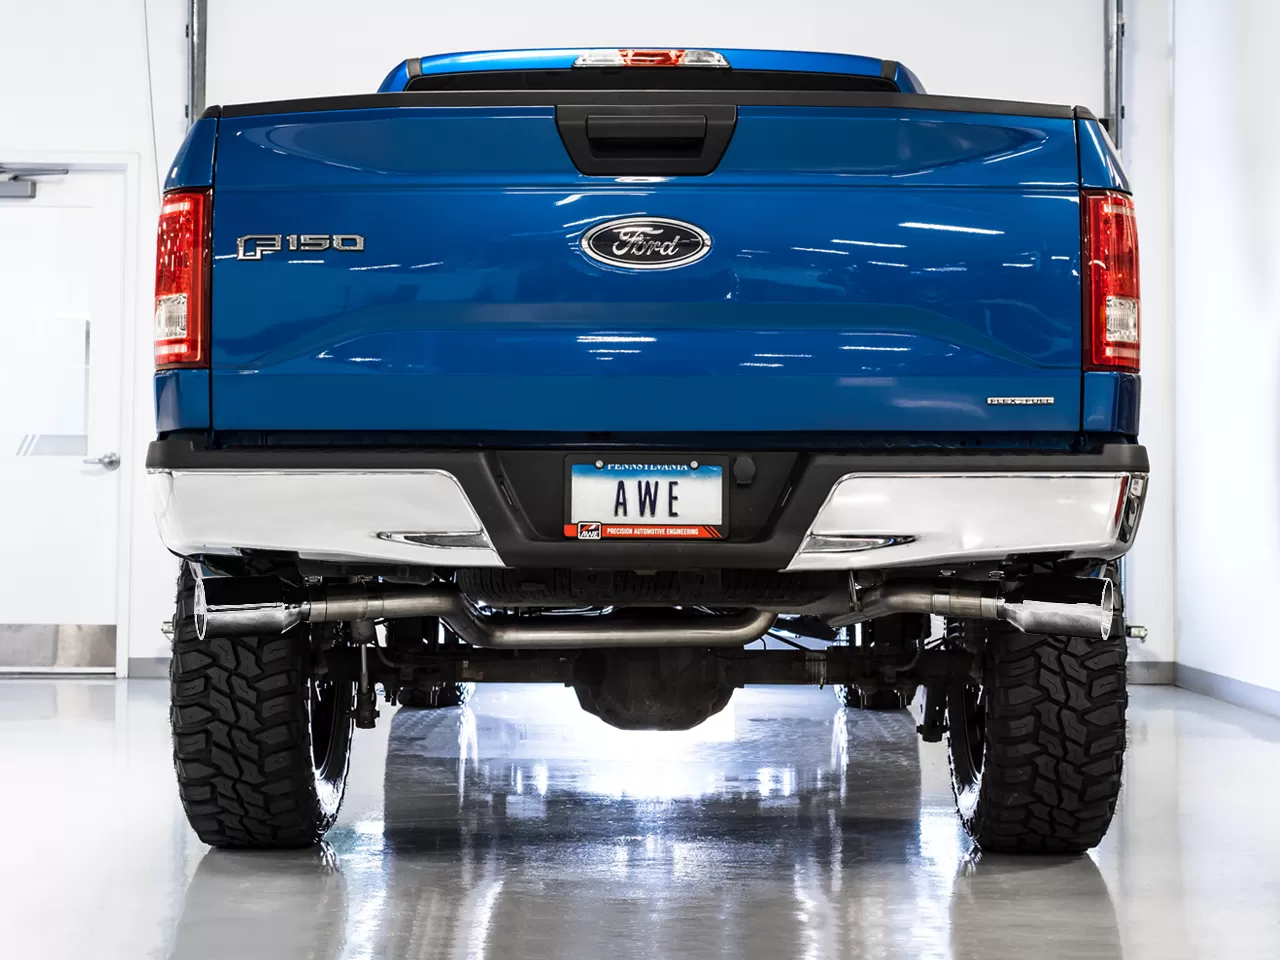 AWE 0FG Dual Exit Exhaust for '15-'20 F-150 - 5" Chrome Silver Tips Ford F-150 King Ranch|Lariat|Platinum|XL|XLT|SSV|Limited 2015-2020 - 3015-32104